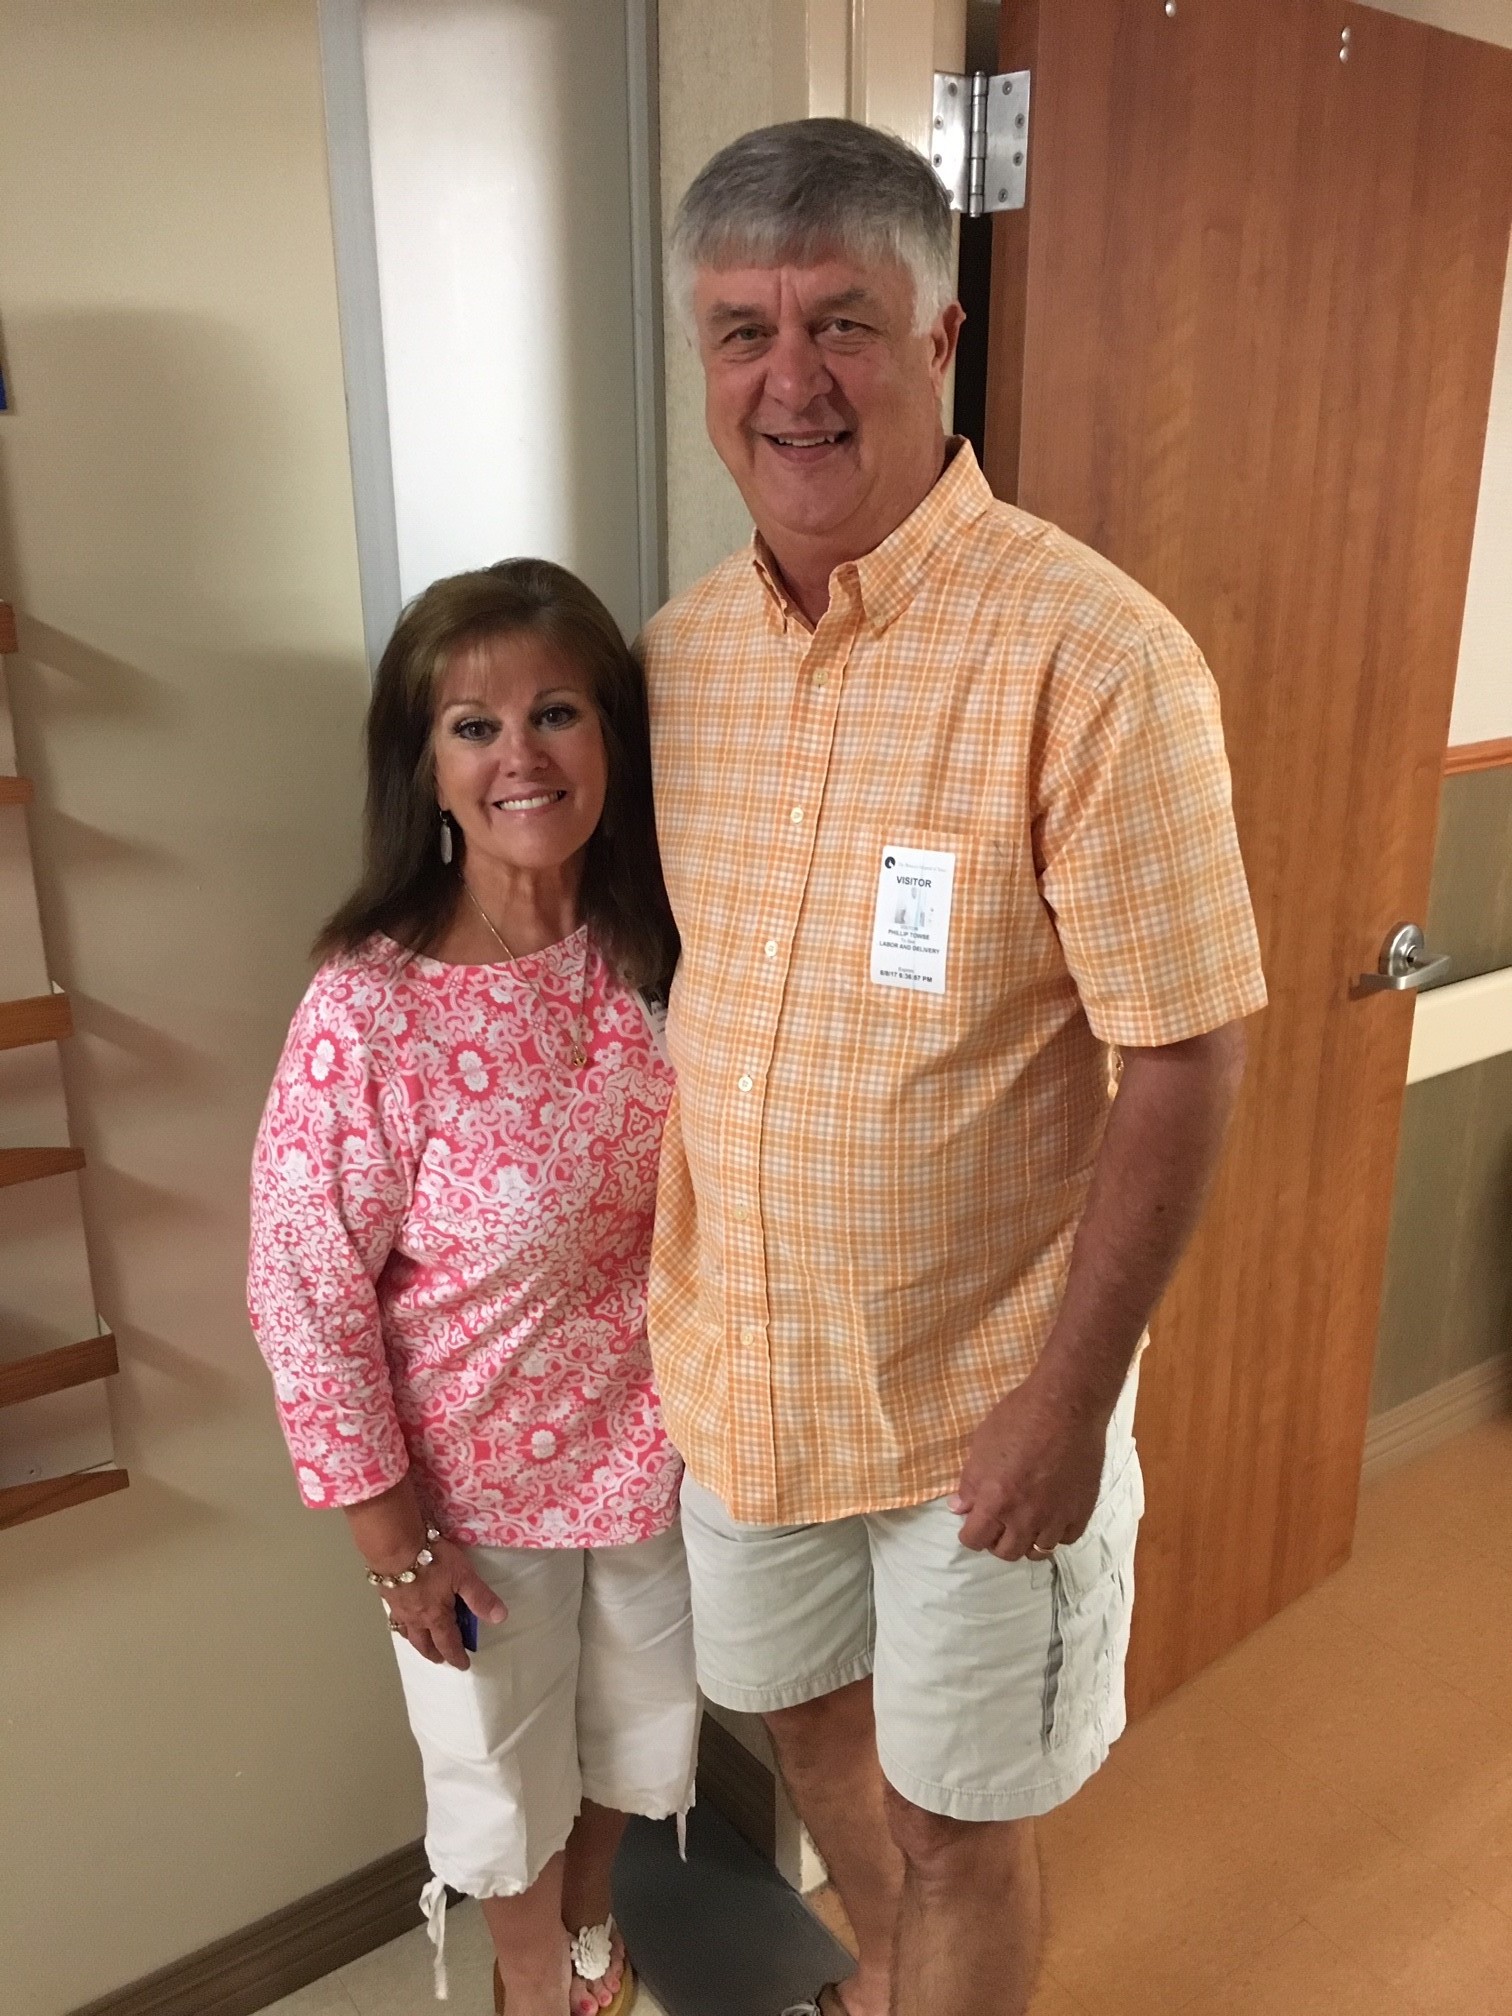 Phil Towse, a COVID-19 patient who received a convalescent plasma transfusion, with his wife, Cathye Jo. (Courtesy of Phil and Cathye Jo Towse)